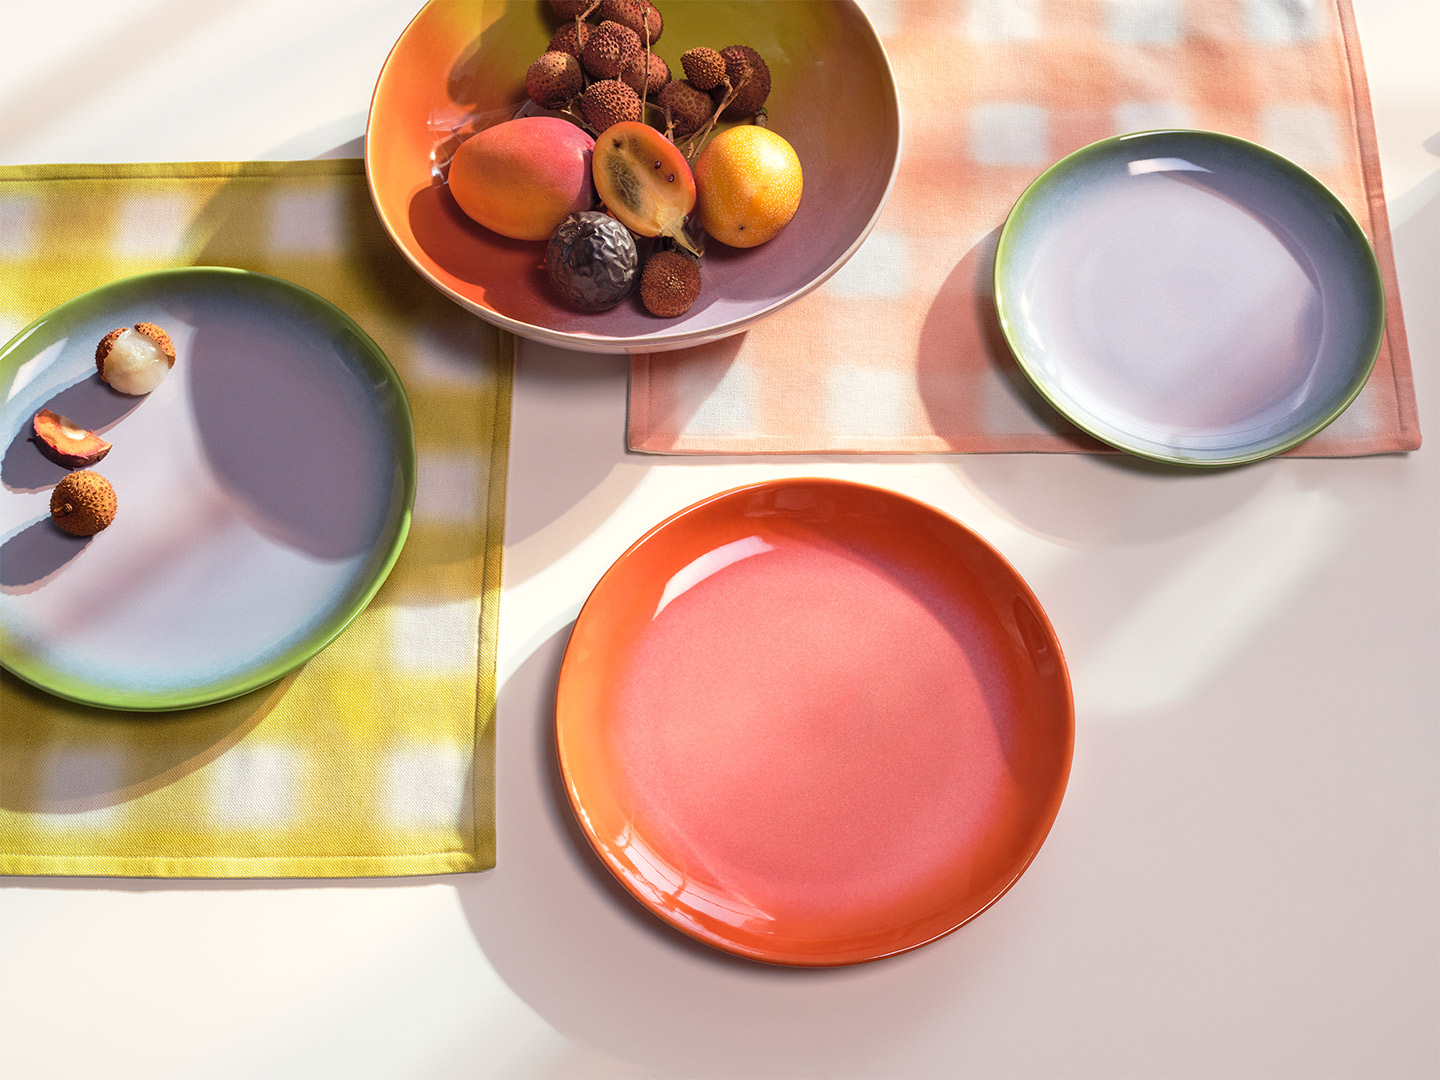 Colour-drenched homewares by India Mahdavi just dropped at H&M